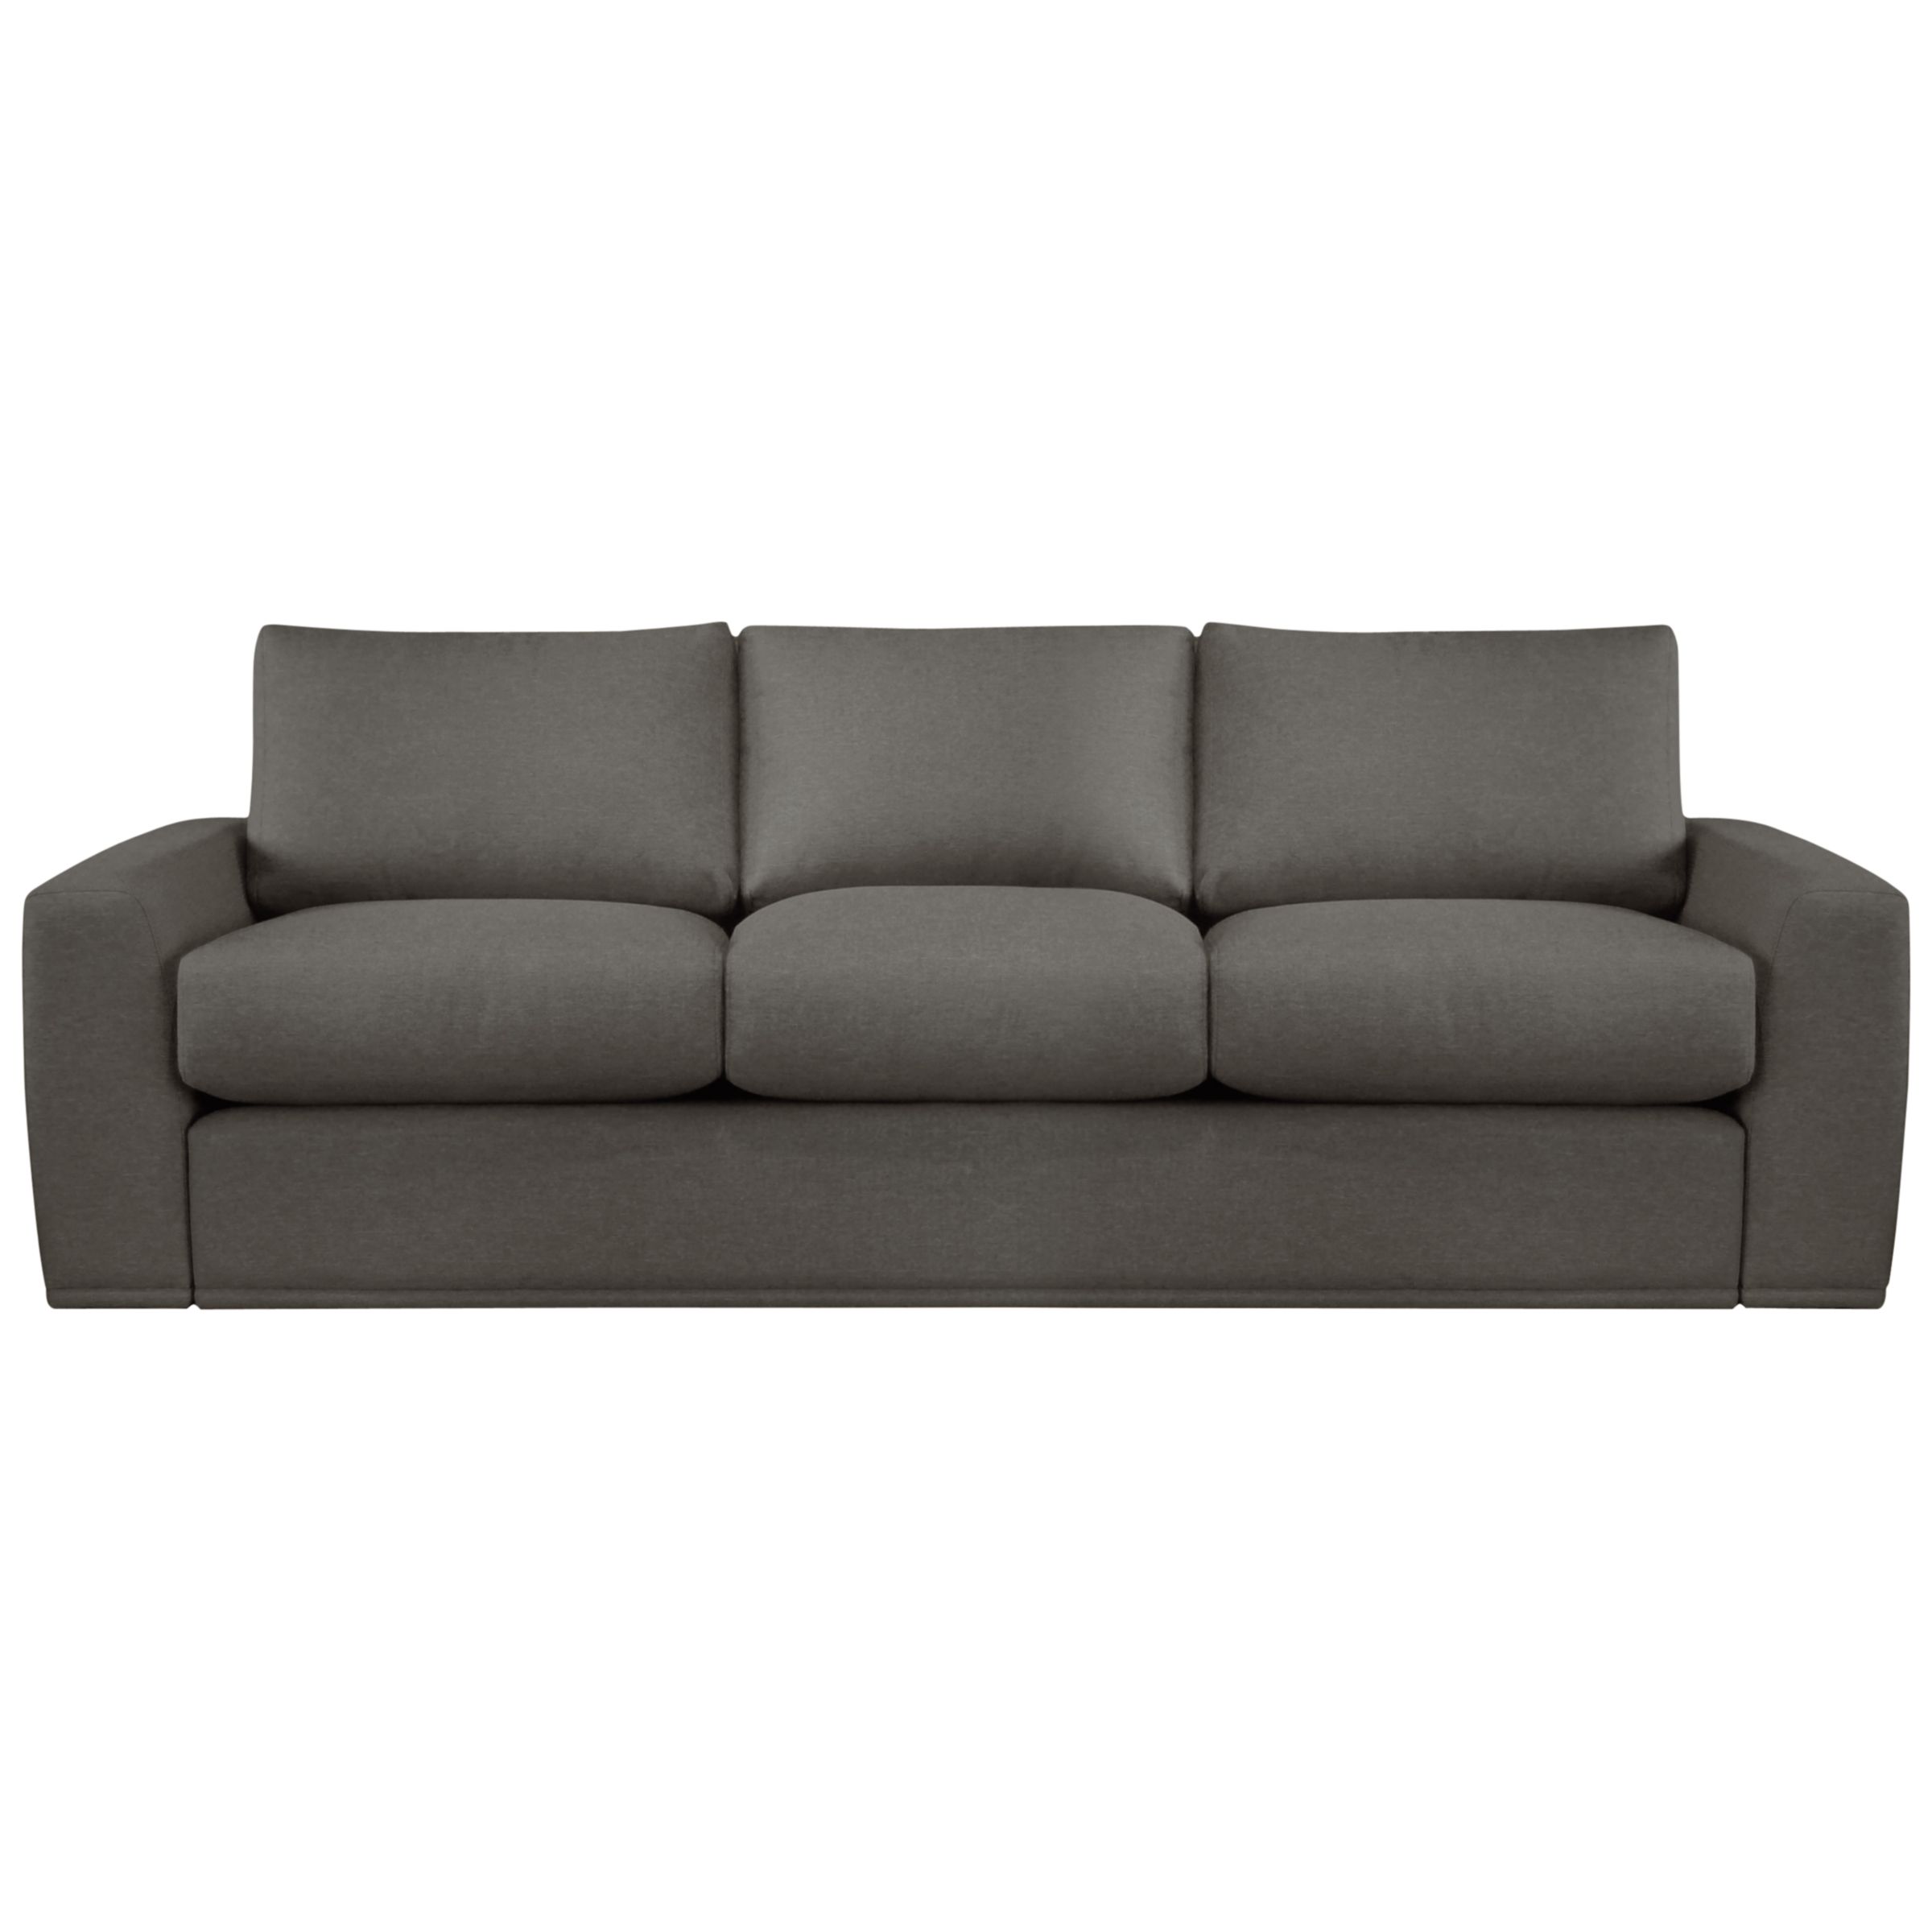 House by John Lewis Finlay Grand Sofa, Charcoal, width 242cm